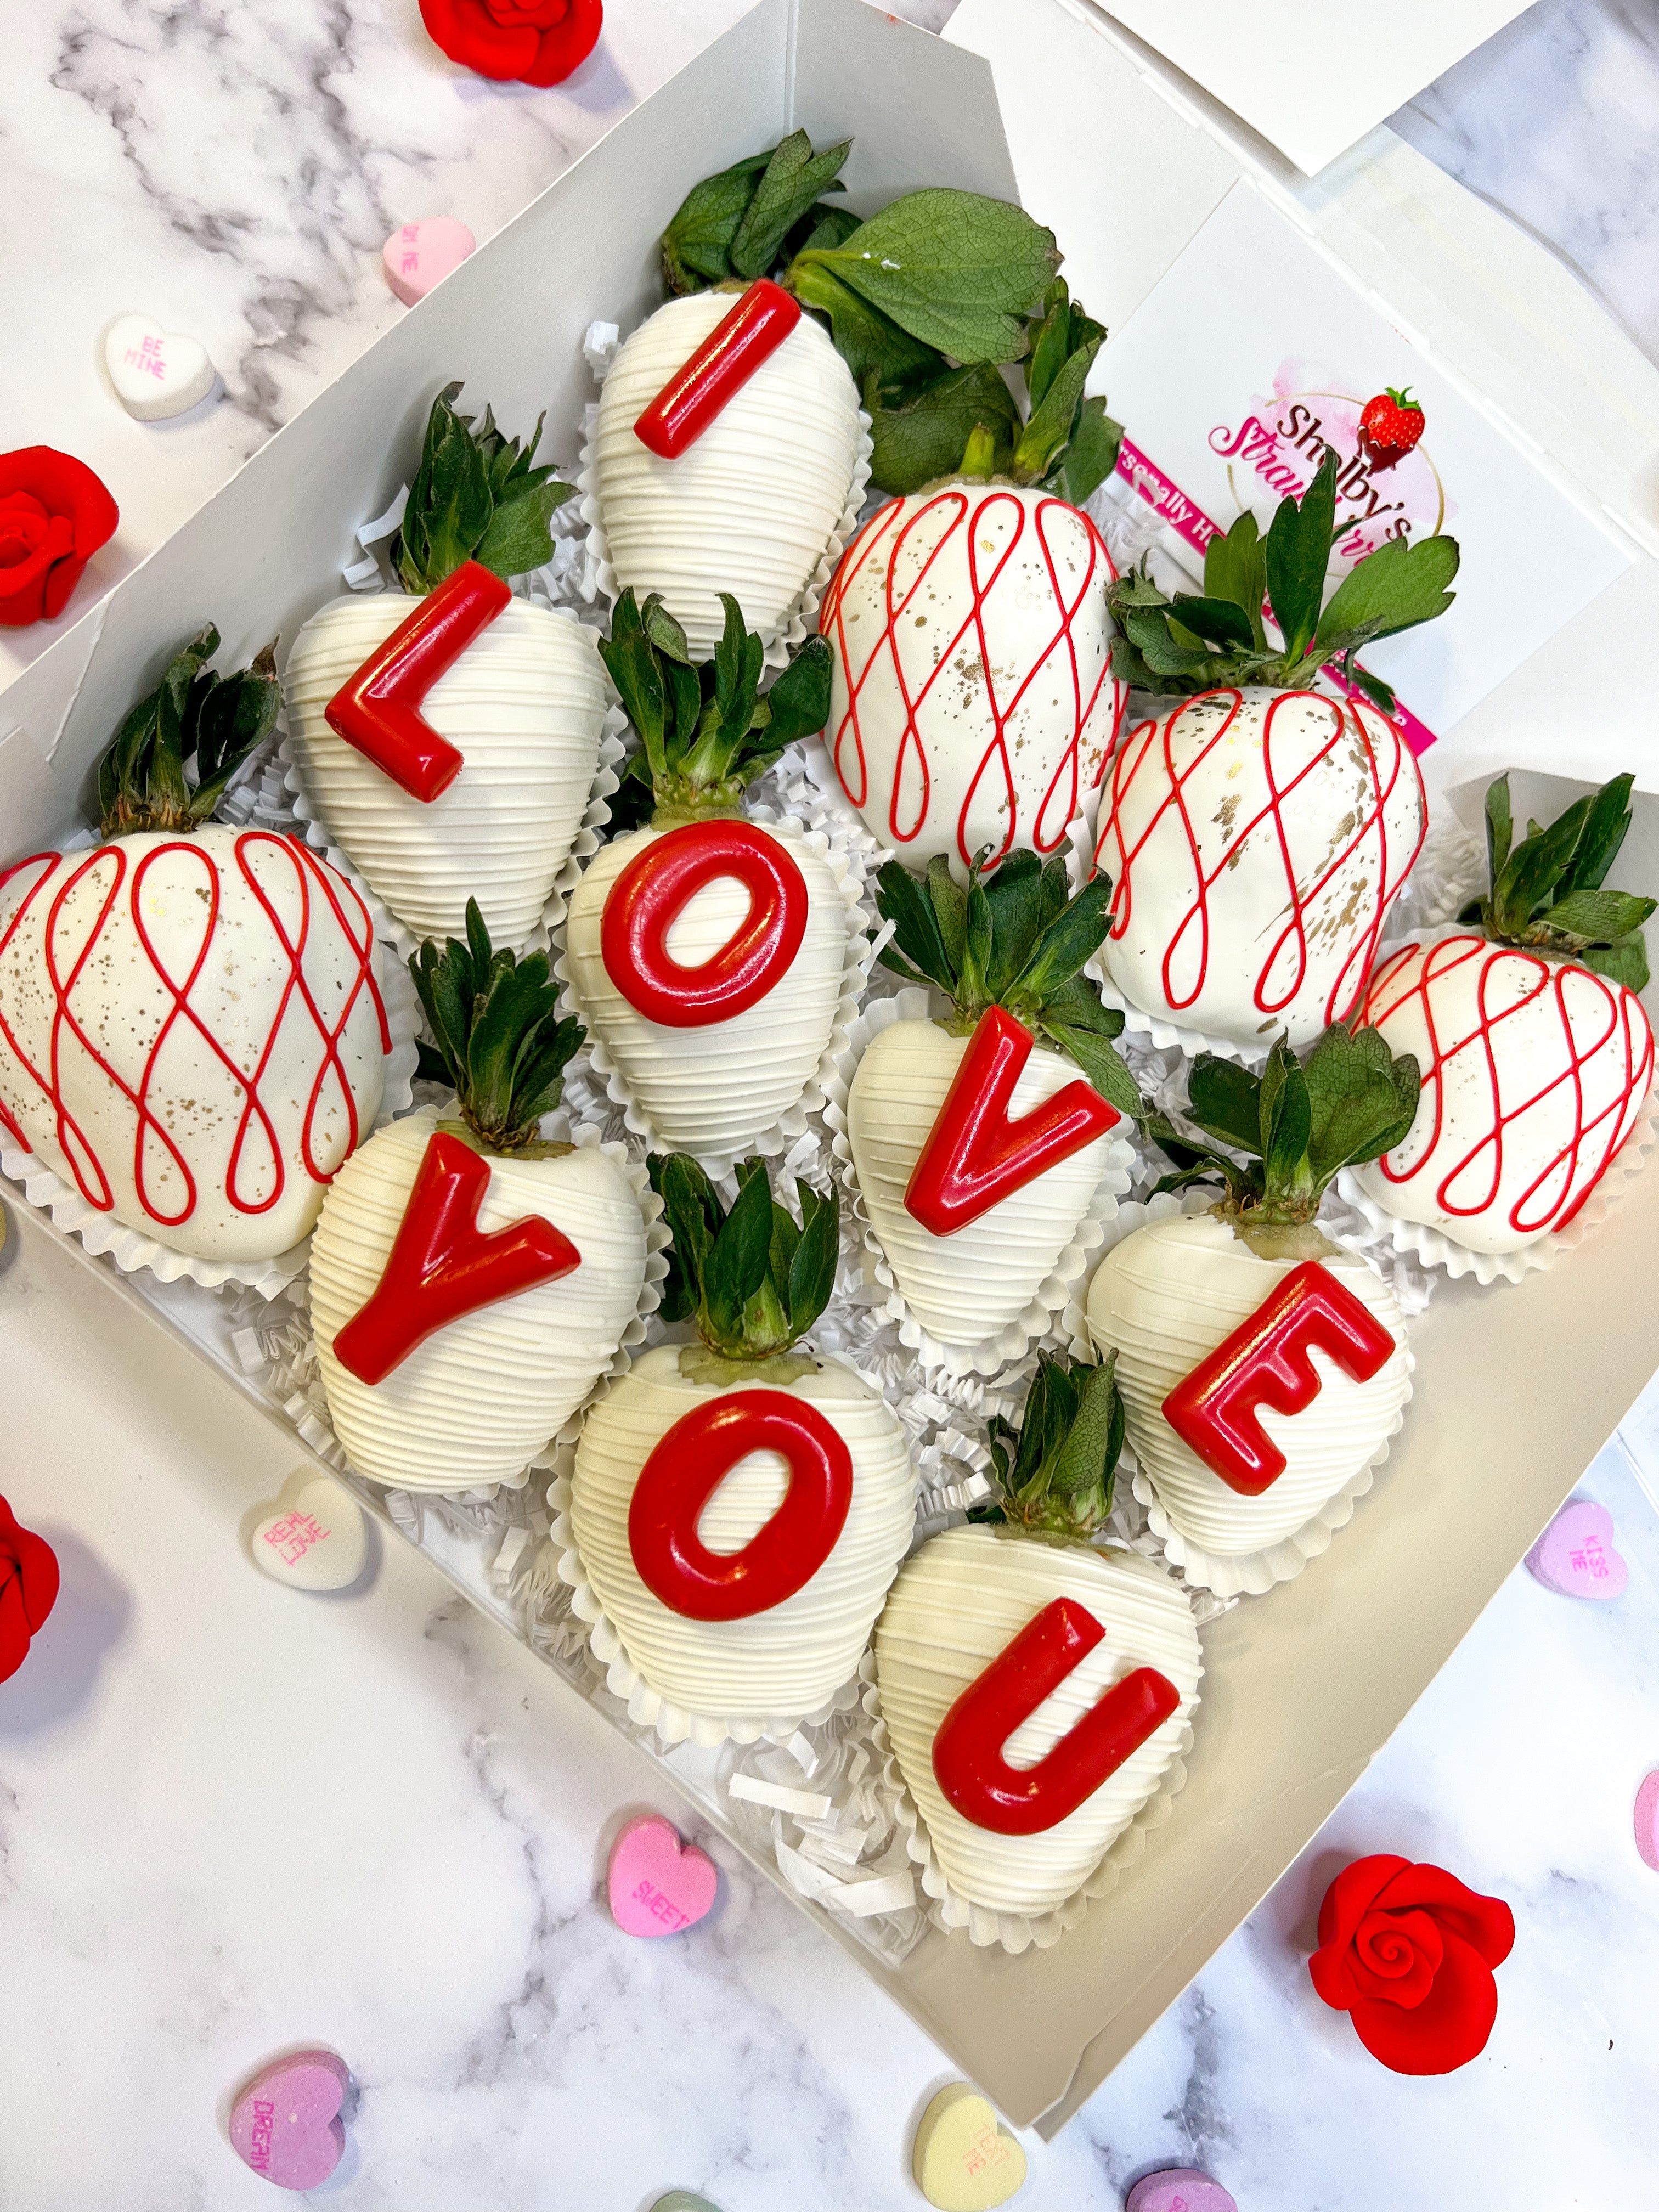 "I Love You" Strawberries - 12 Count